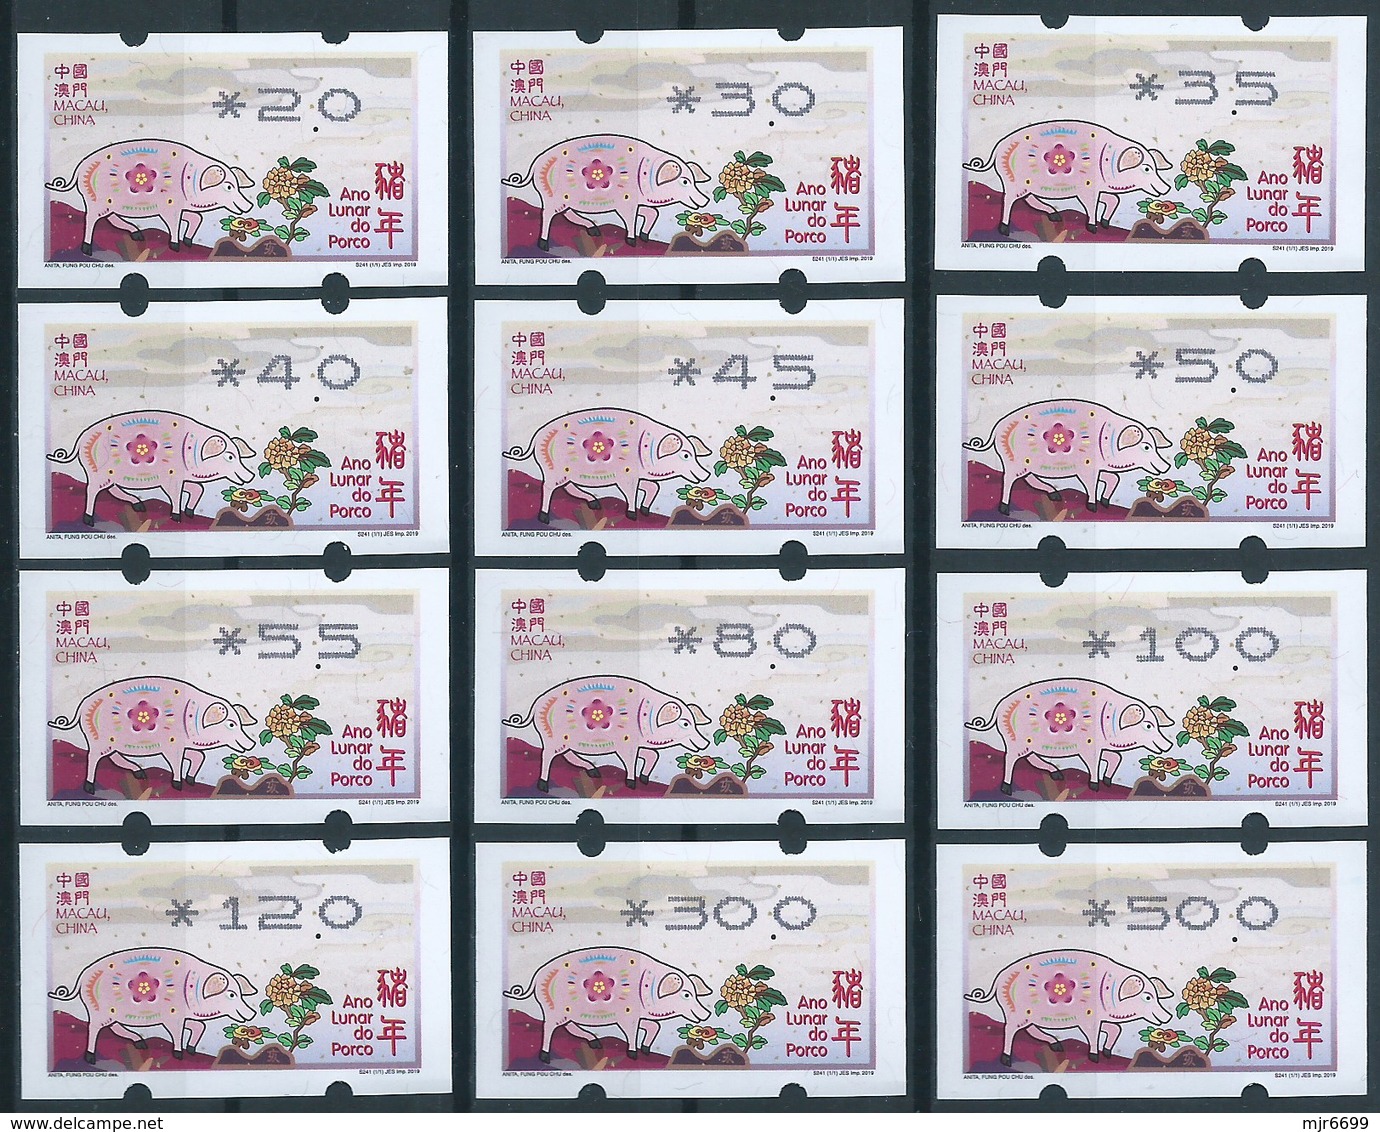 MACAU 2019 ZODIAC YEAR OF THE PIG ATM LABELS "NEW VISION" COMPLETE LARGE SET OF 12 VALUES - - Automatenmarken